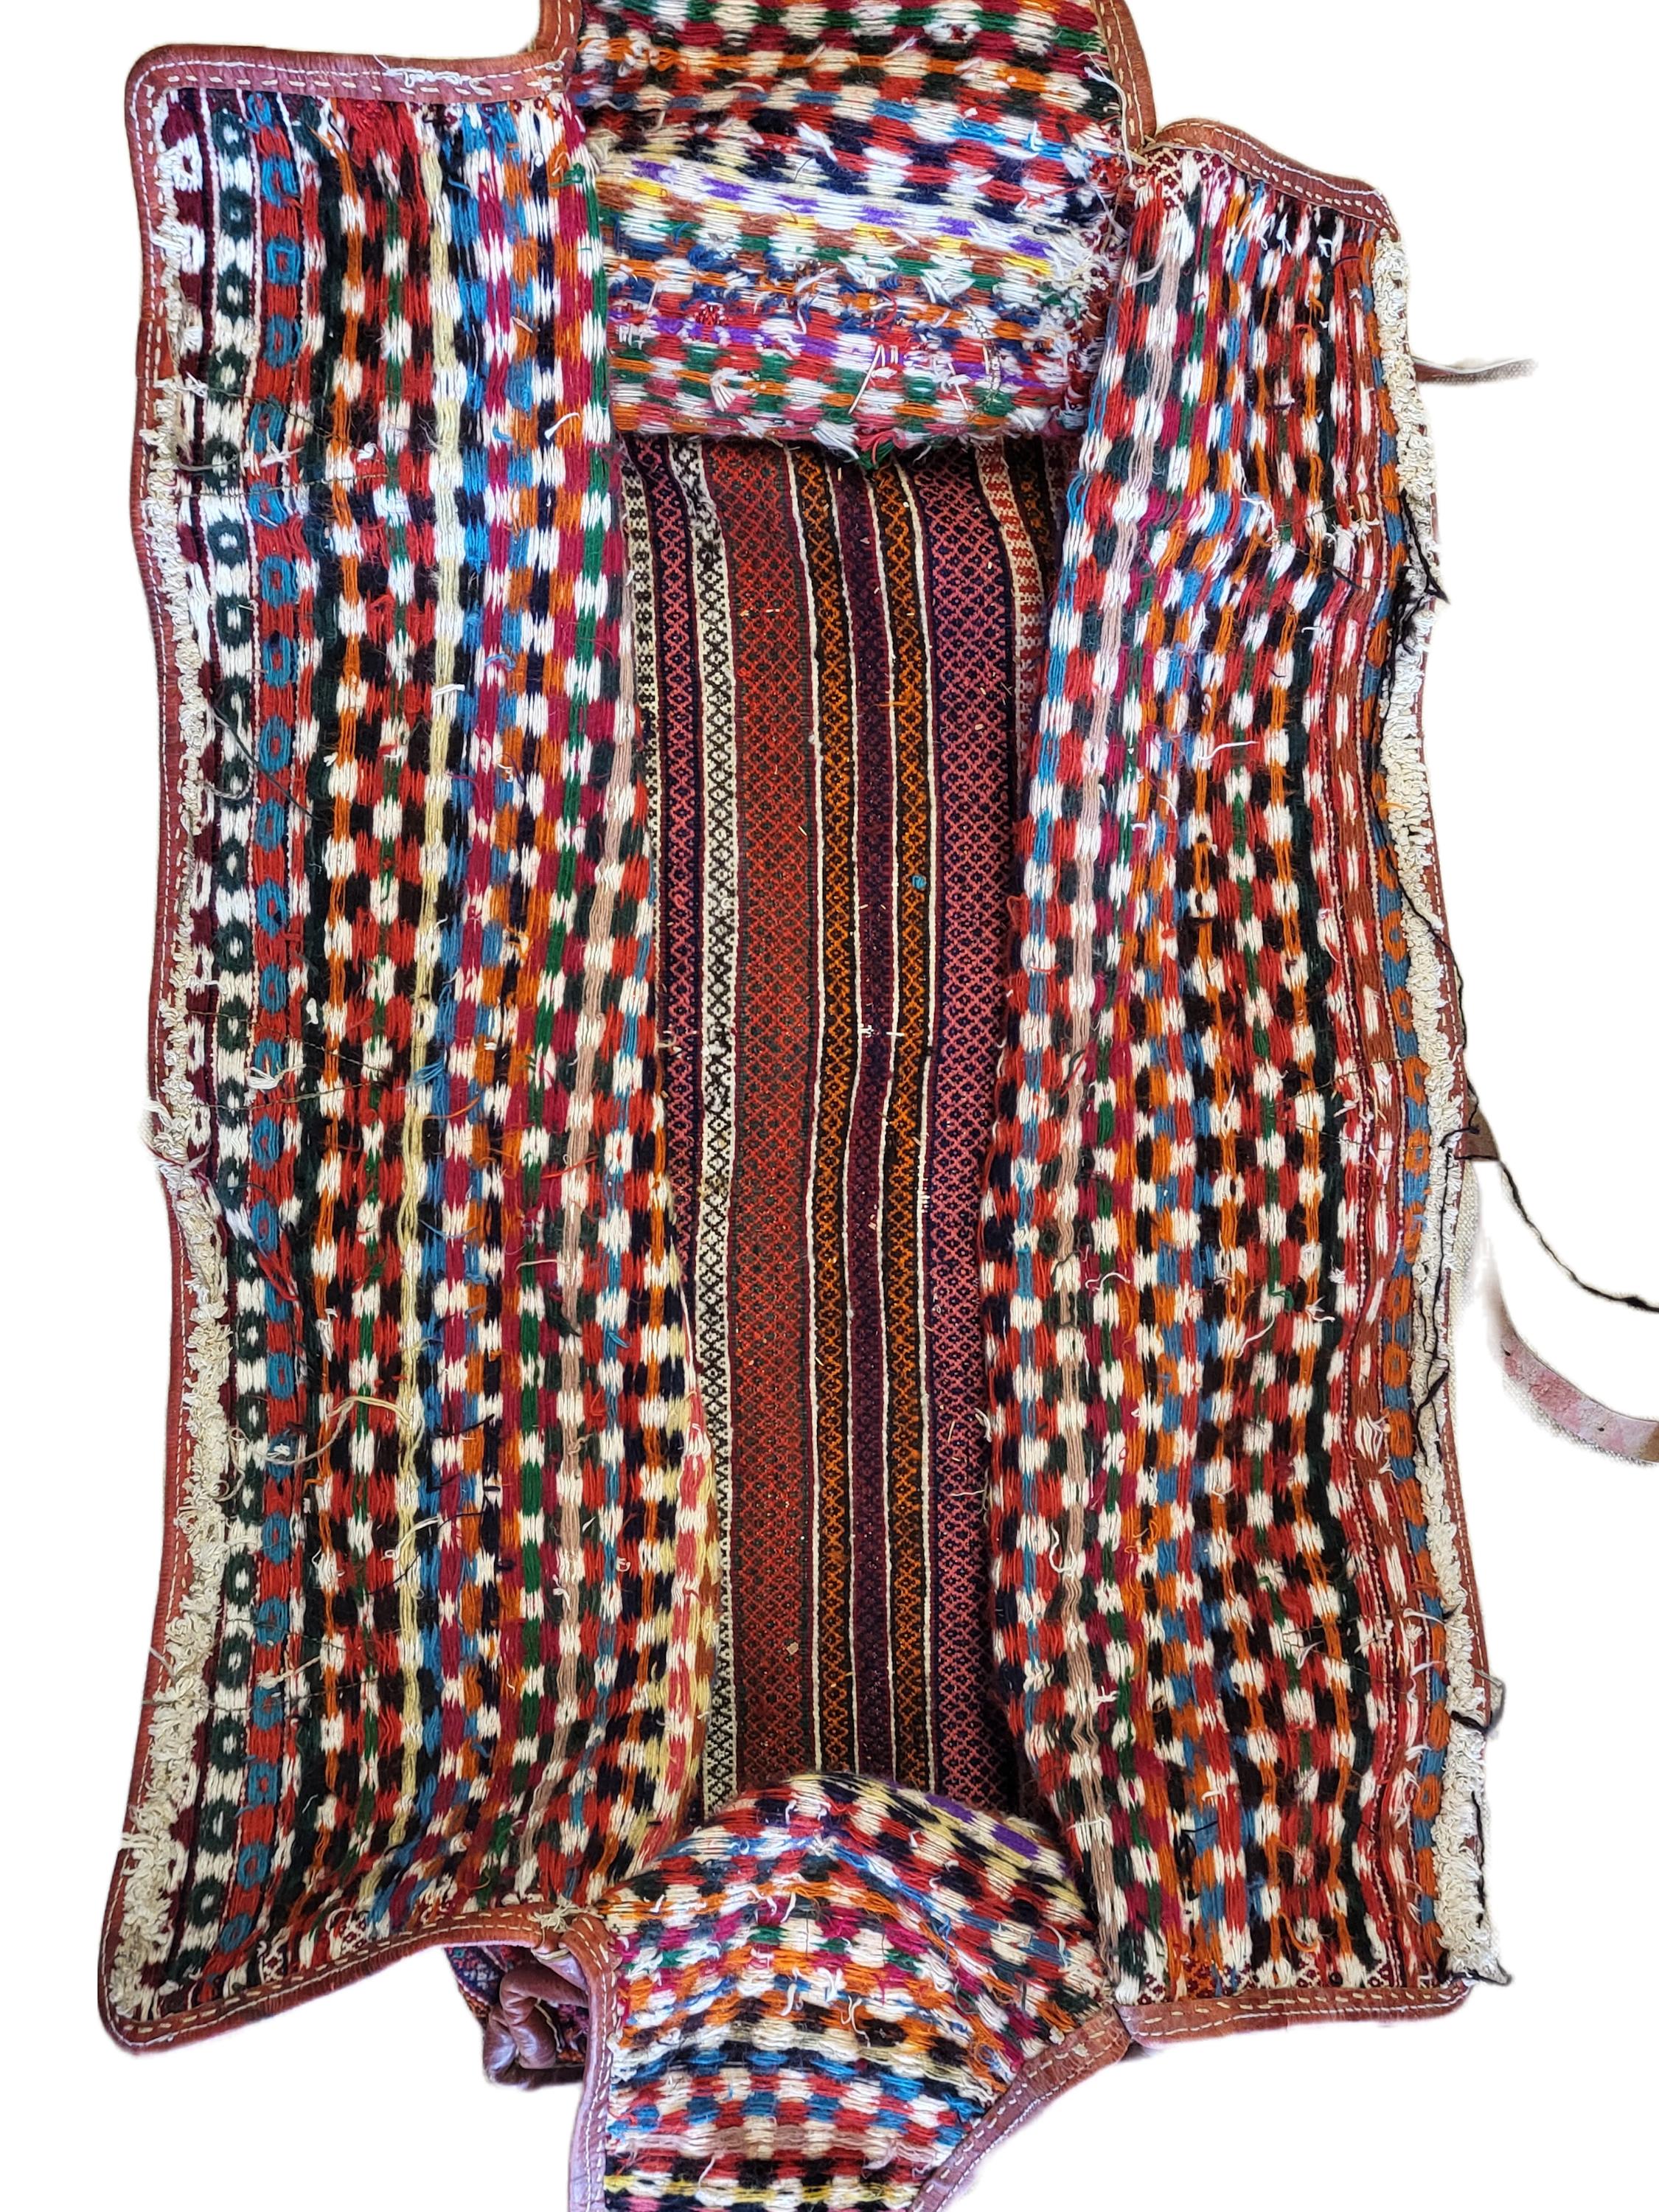 Stunning Persian Qashqai Nomadic Bag

Beautiful piece of Persian heritage, handcrafted by the legendary nomads The Qashqais. This intricate and funtional piece of art took about a year to make. The Qashqais are master craftsman and reflect their